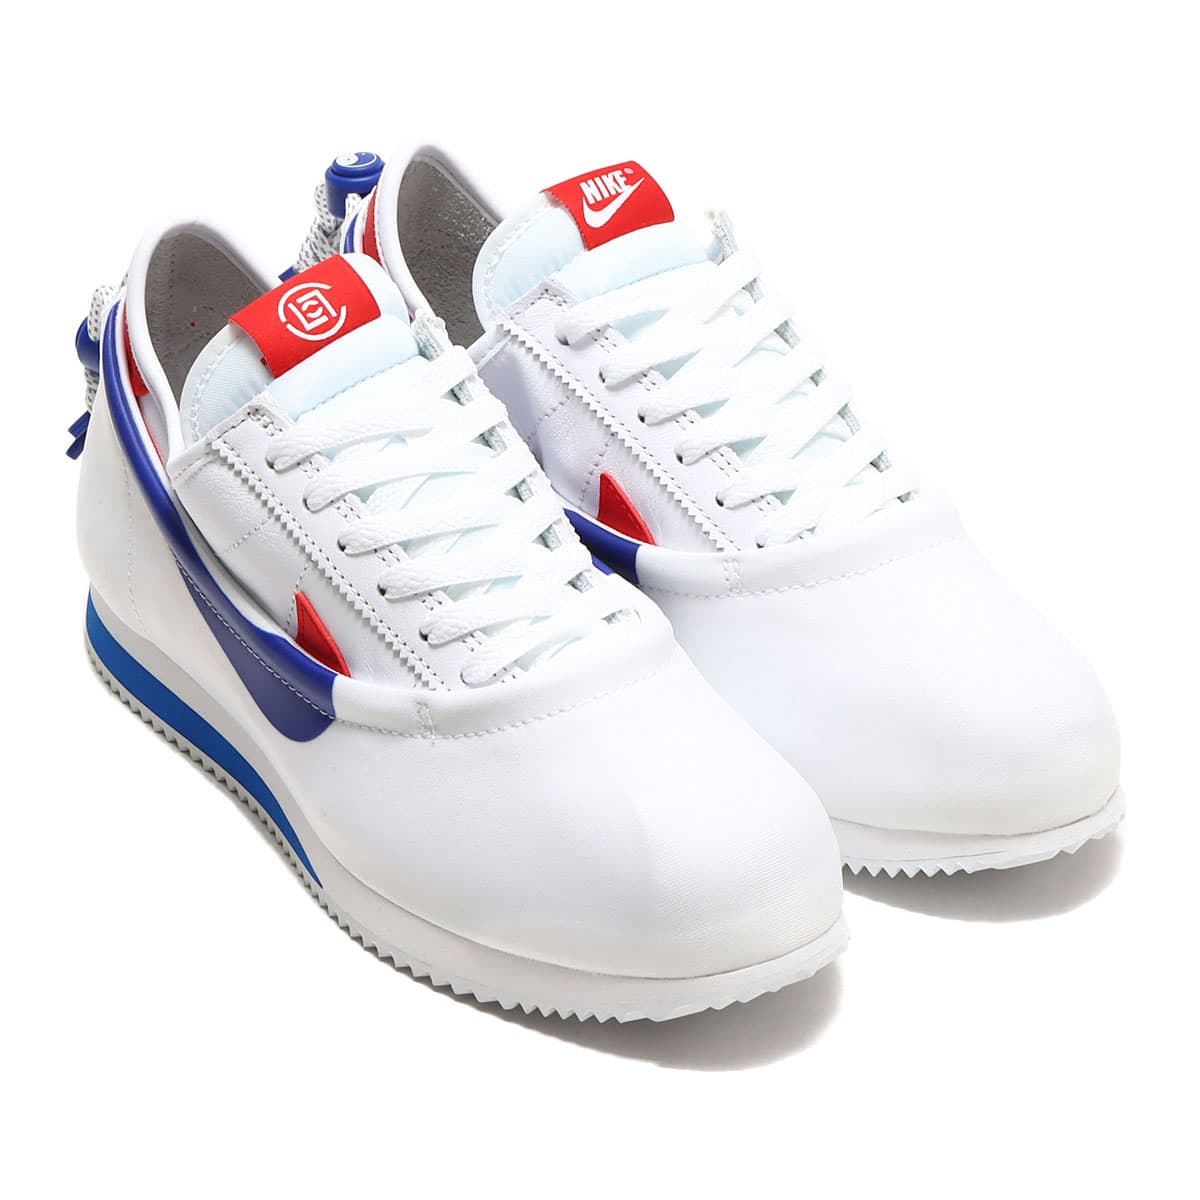 cortez CLOT White and Game Royal